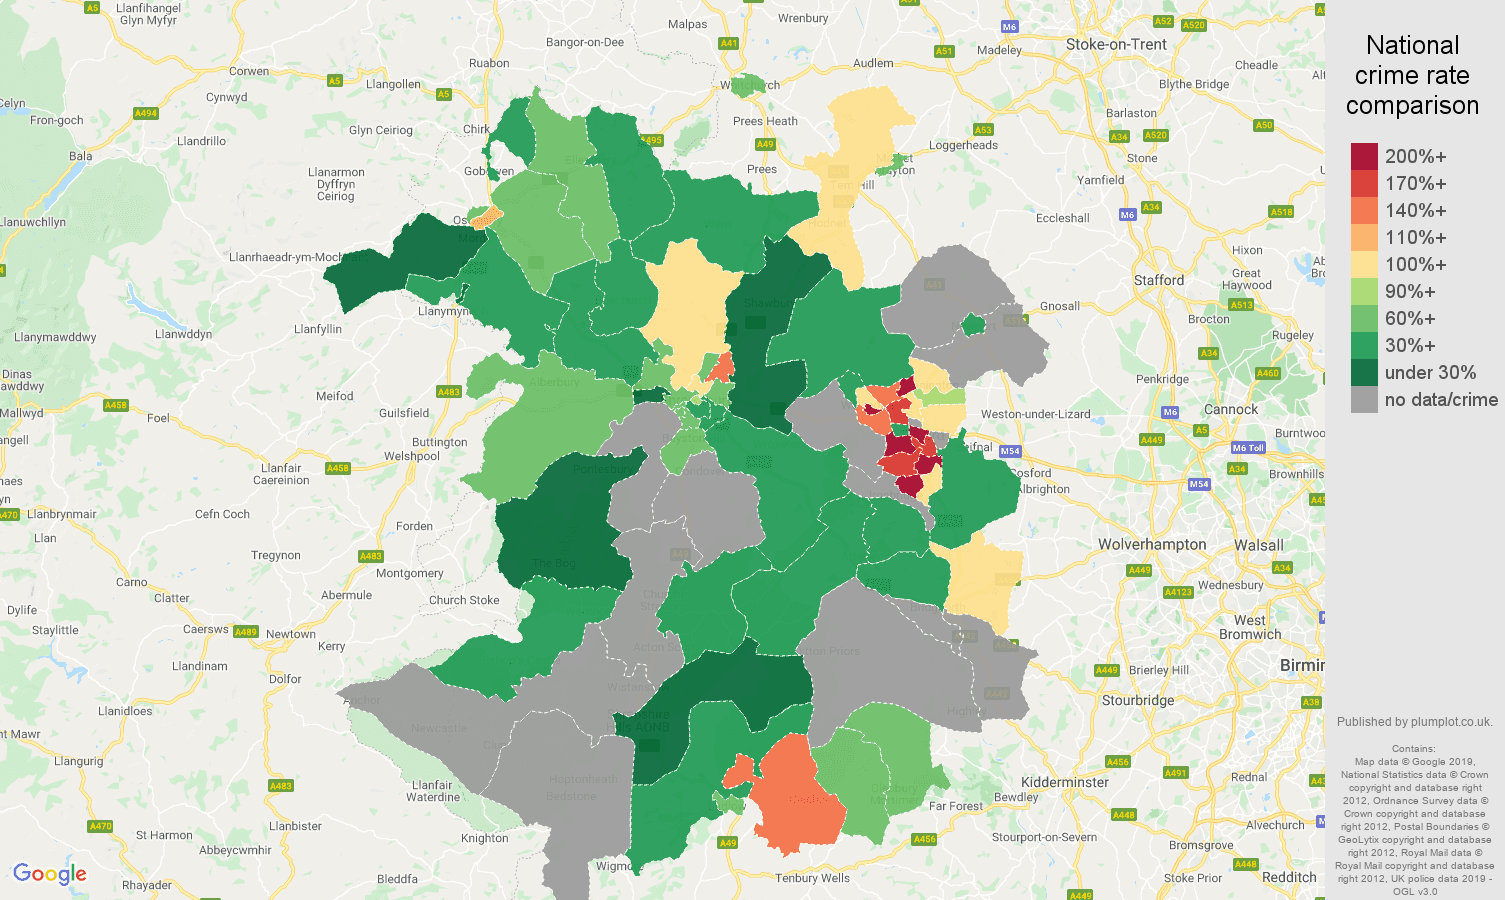 Shropshire possession of weapons crime rate comparison map